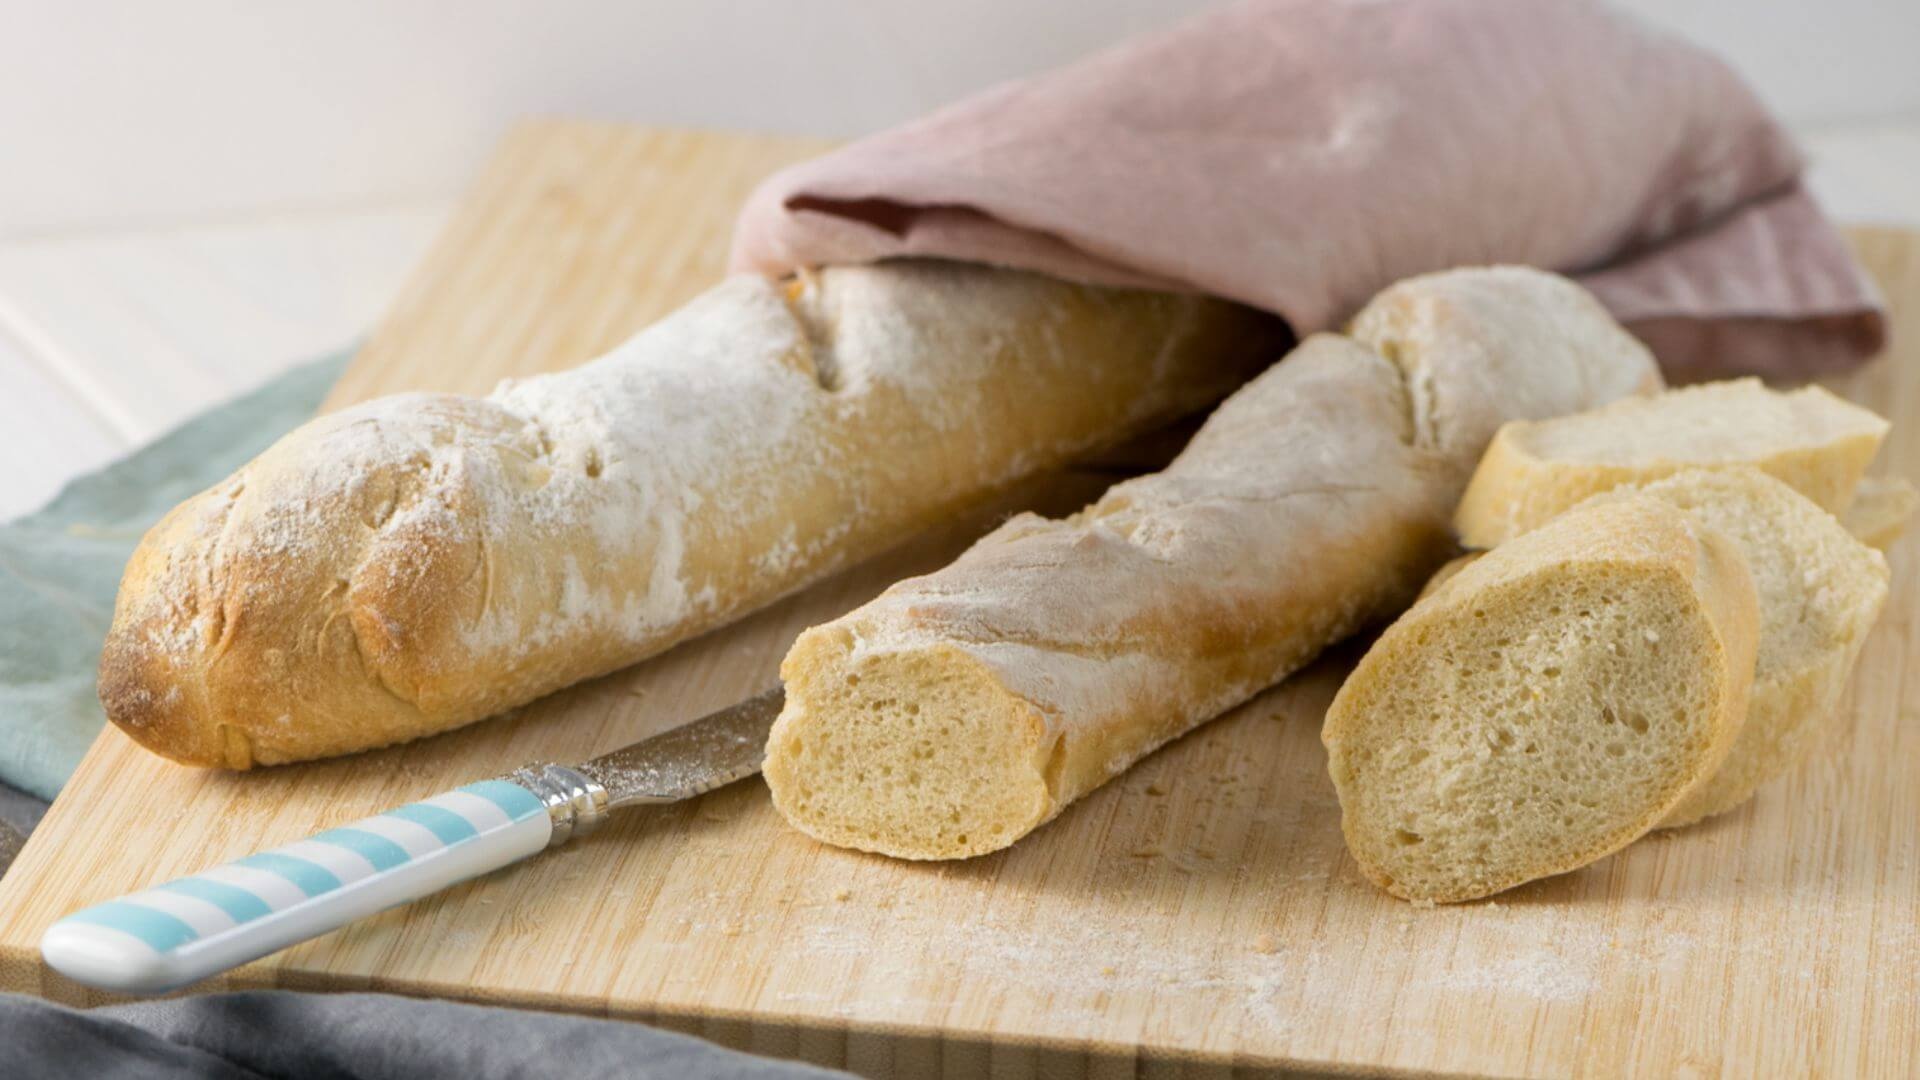 Baguette: Perfect for sandwiches or as an accompaniment to a soup or salad. 1920x1080 Full HD Background.